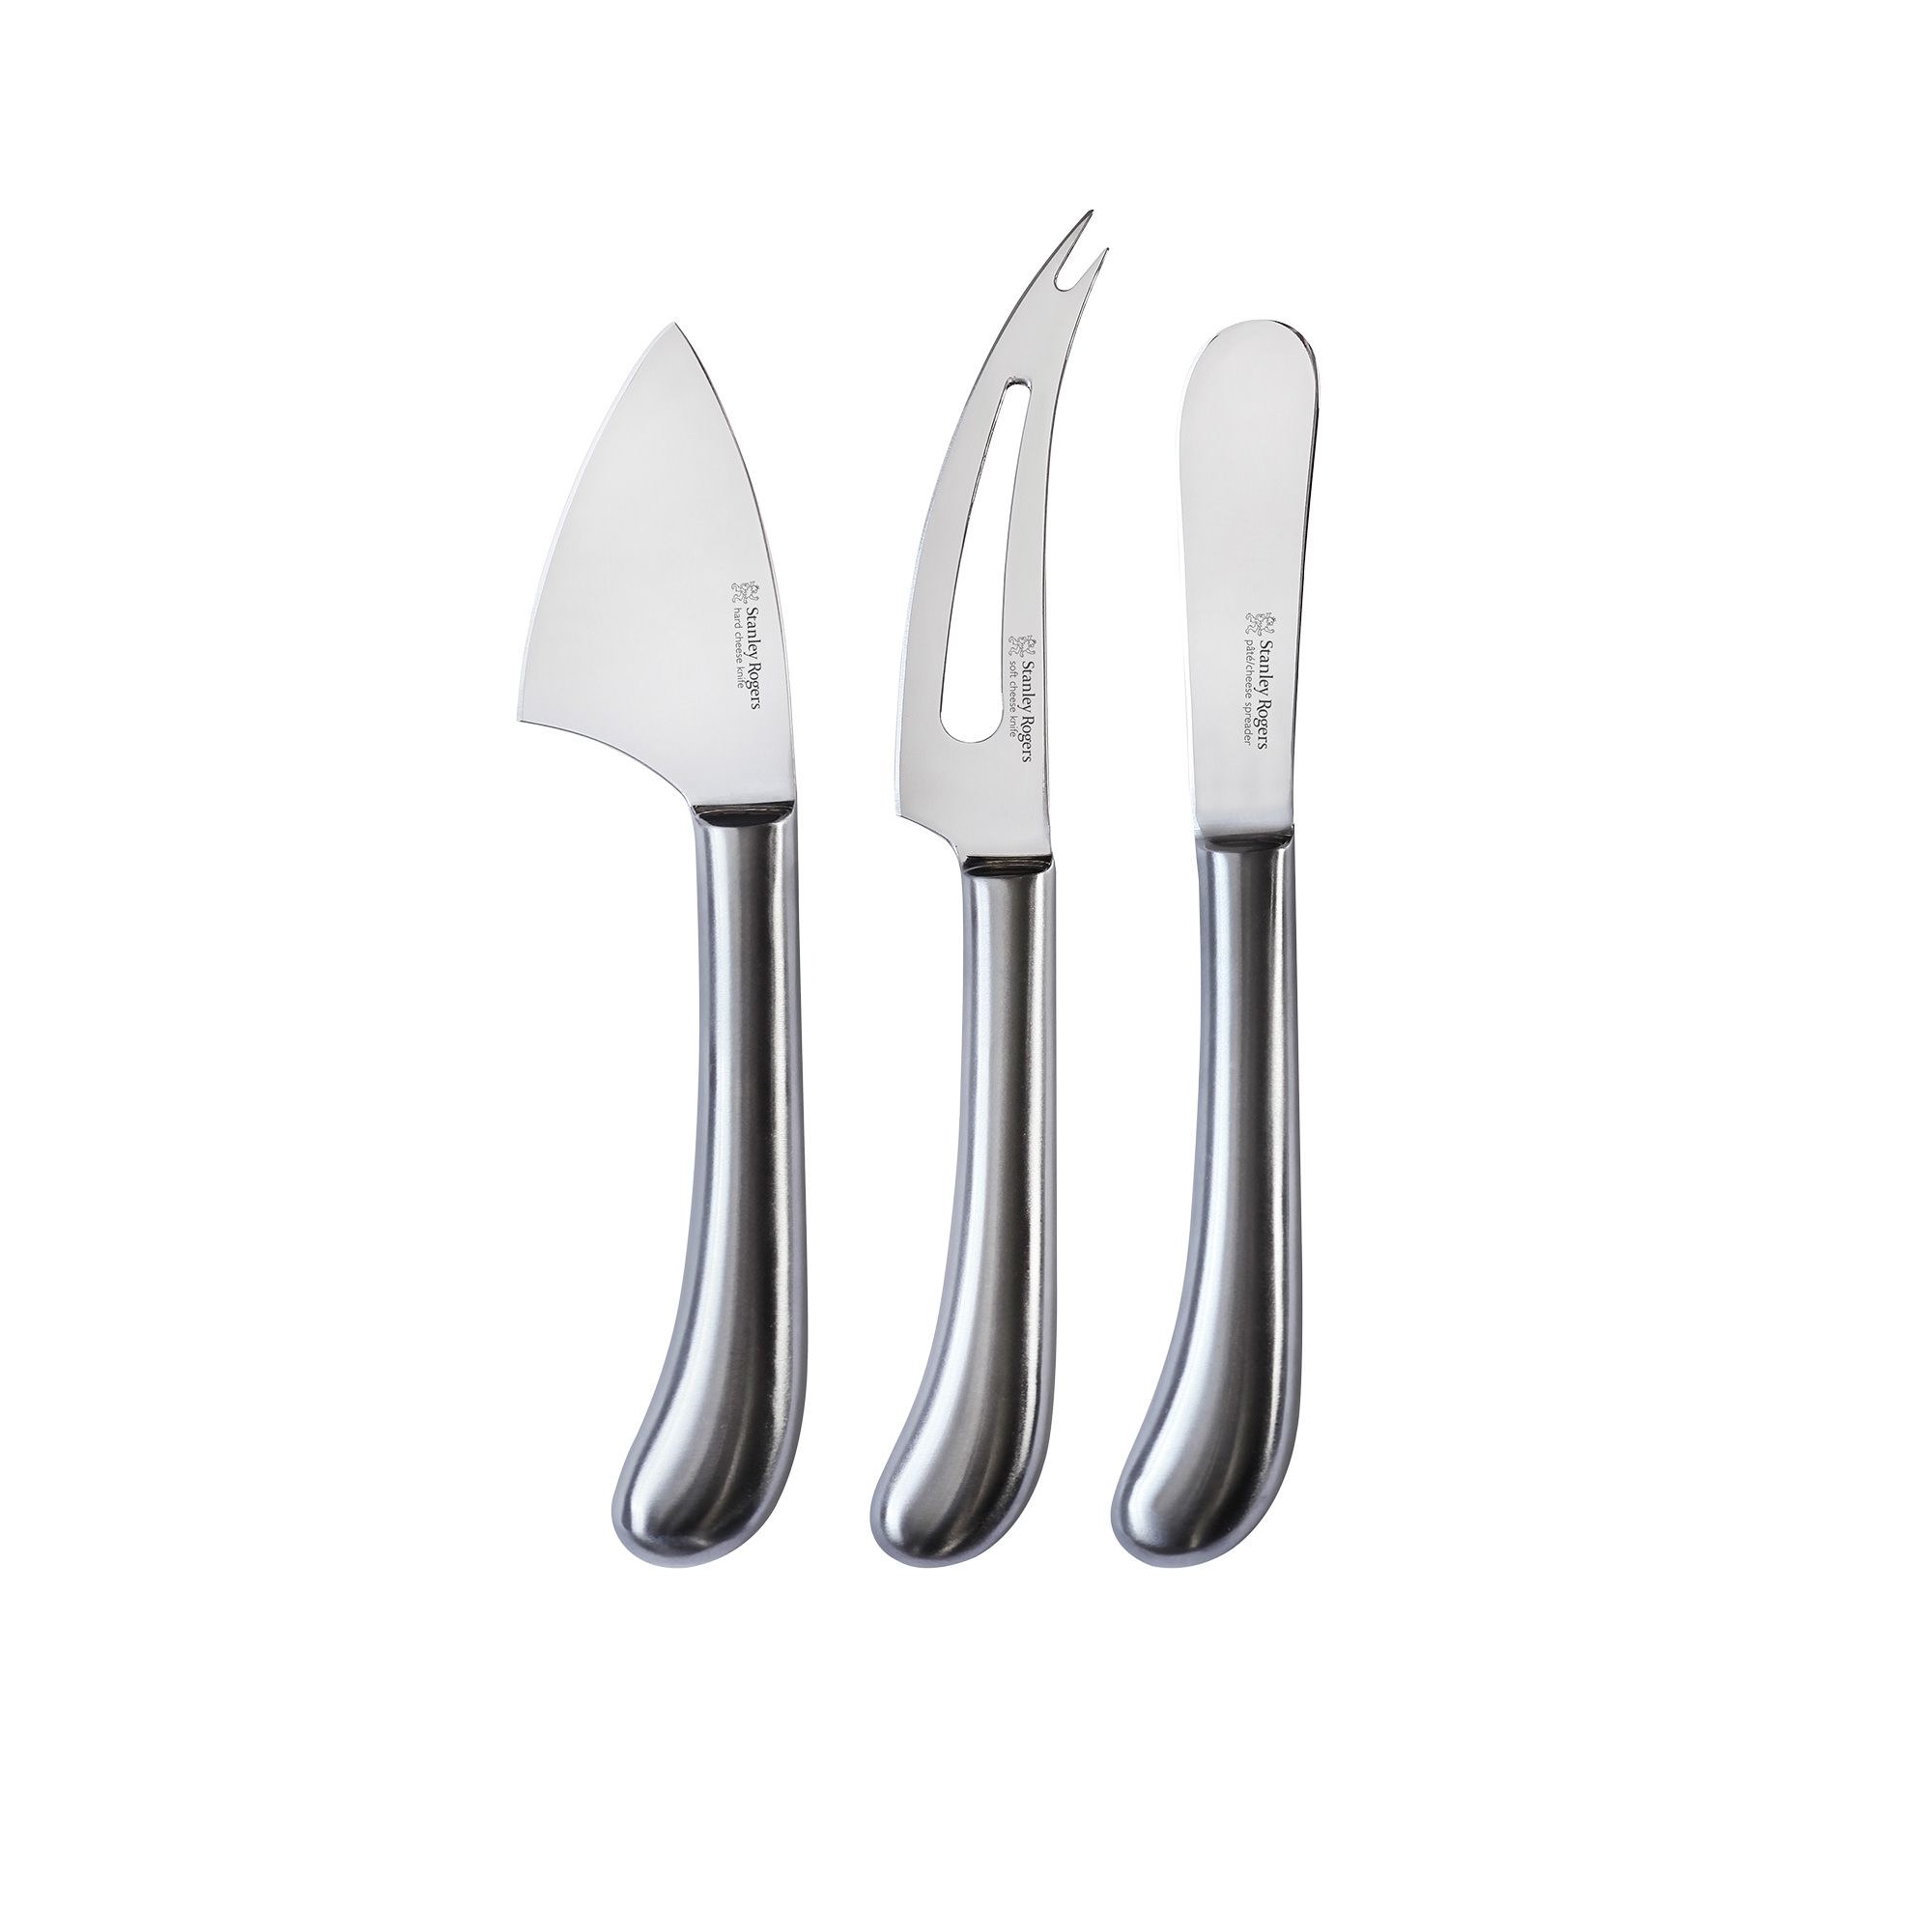 Stanley Rogers Pistol Grip Cheese Knife Set 3pc Stainless Steel Image 1